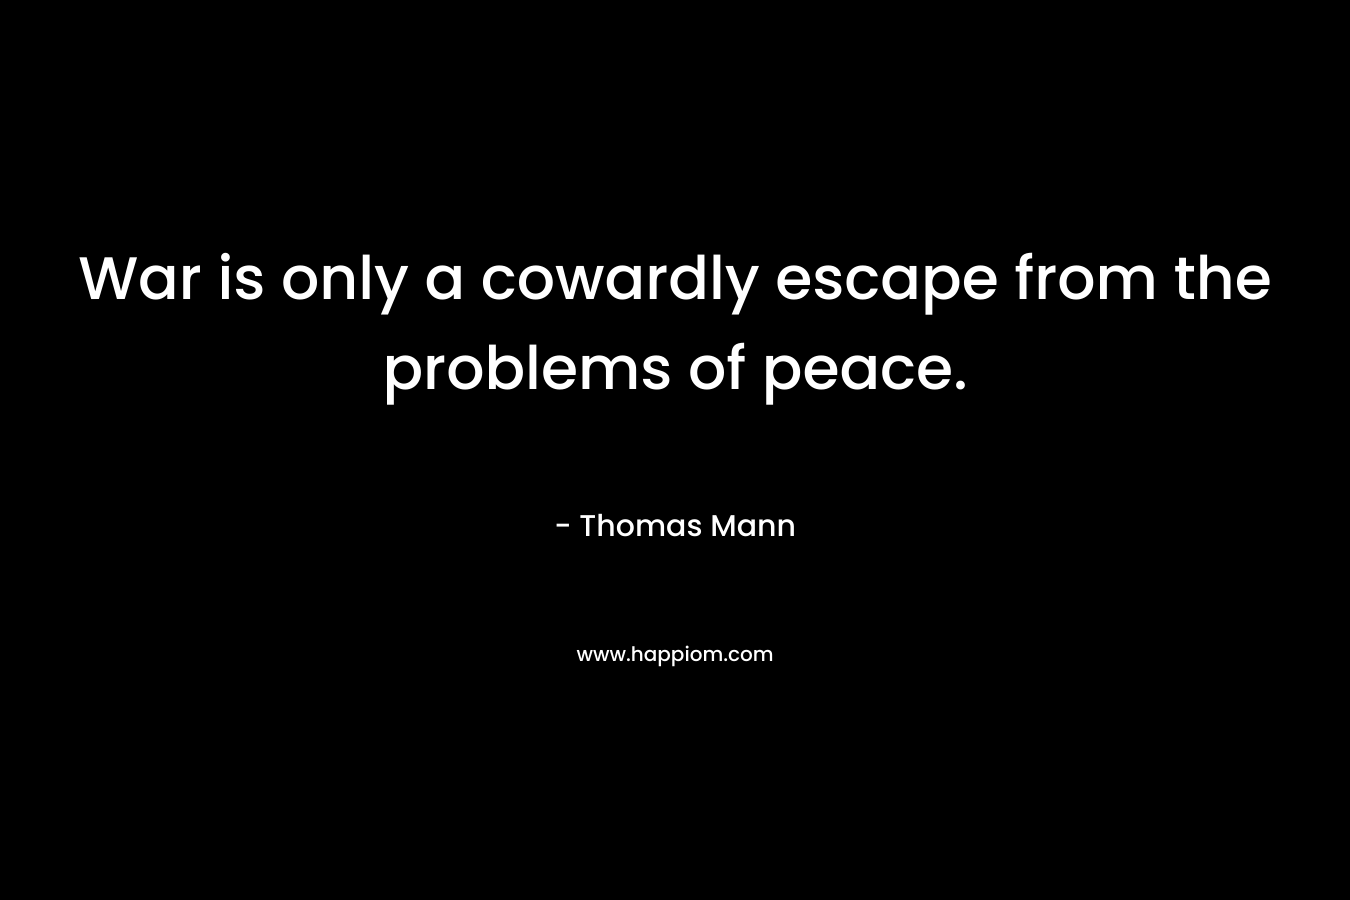 War is only a cowardly escape from the problems of peace. – Thomas Mann